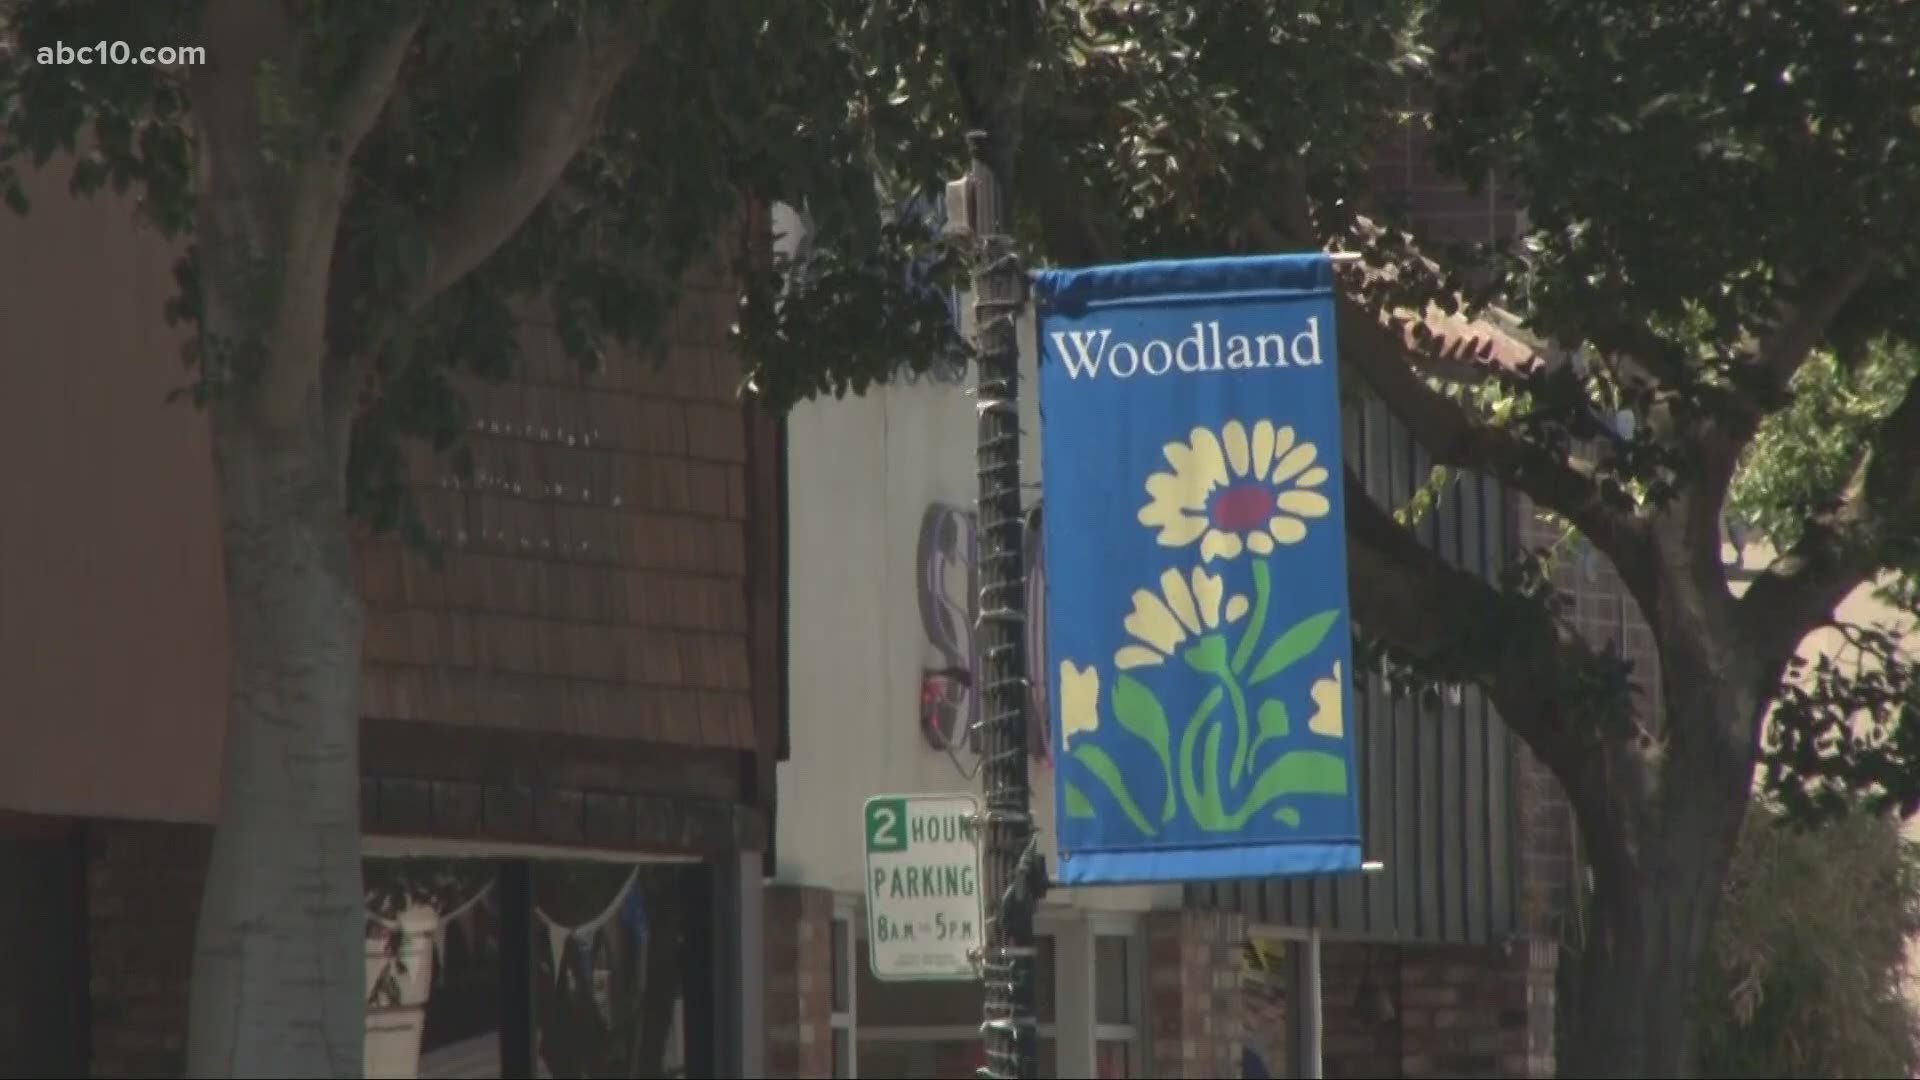 One nursing home in Woodland is experiencing a coronavirus outbreak. One person died, 23 residents and 12 staff members tested positive for the novel coronavirus.